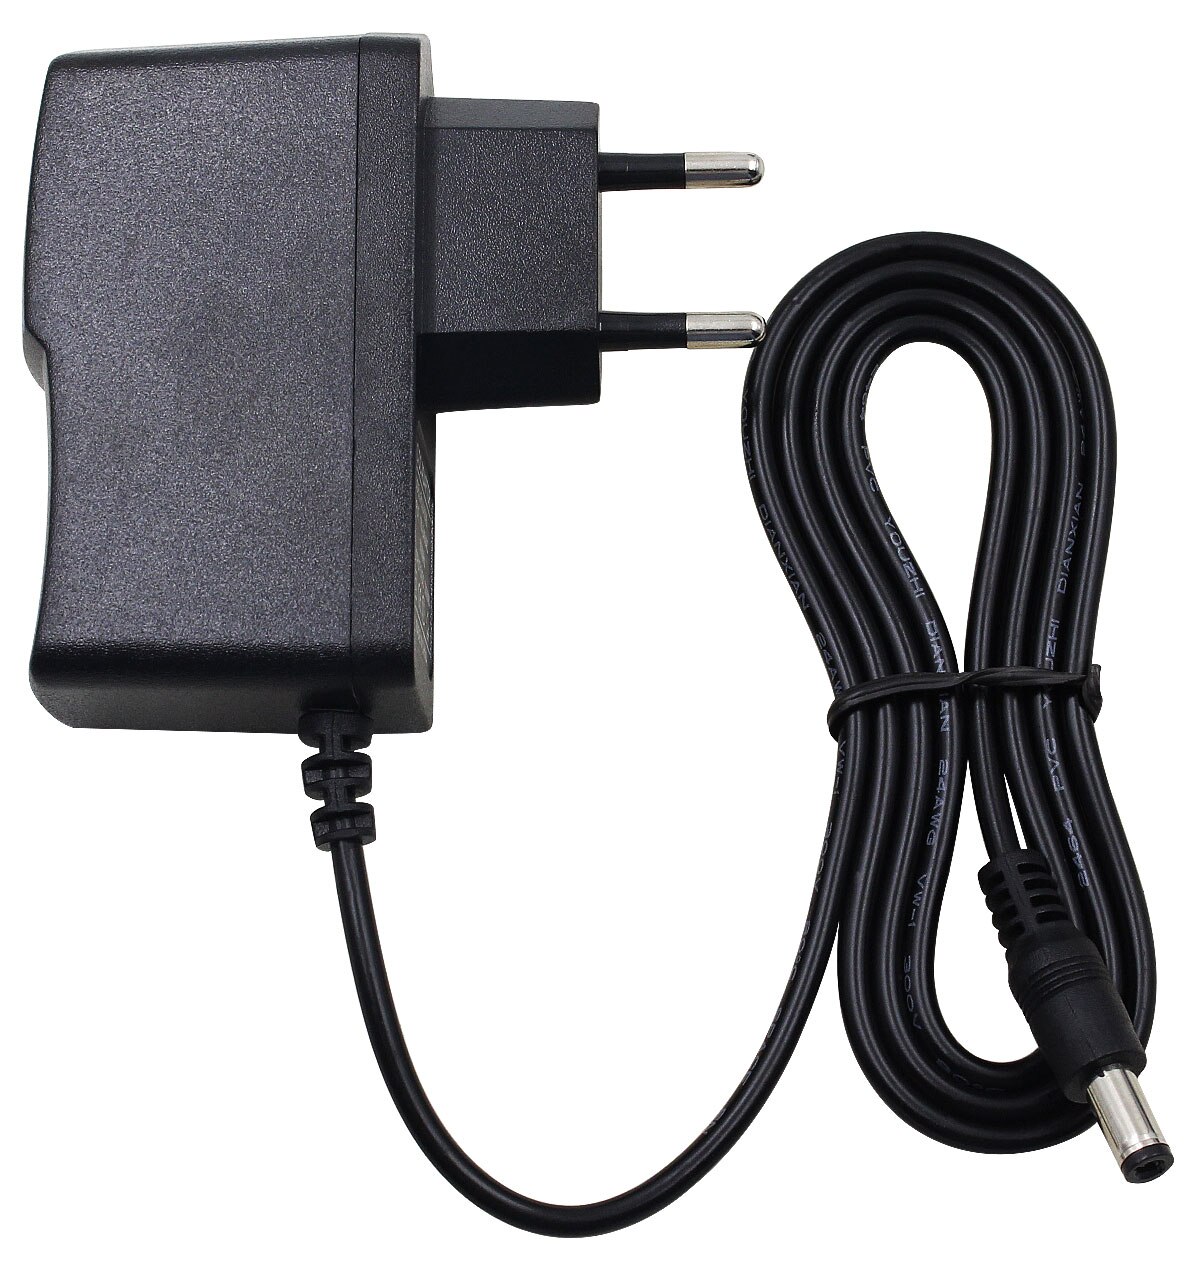 Us Ac Adapter Voeding Lader Snoer Voor X96 S905x Quad Cord Android Tv Box